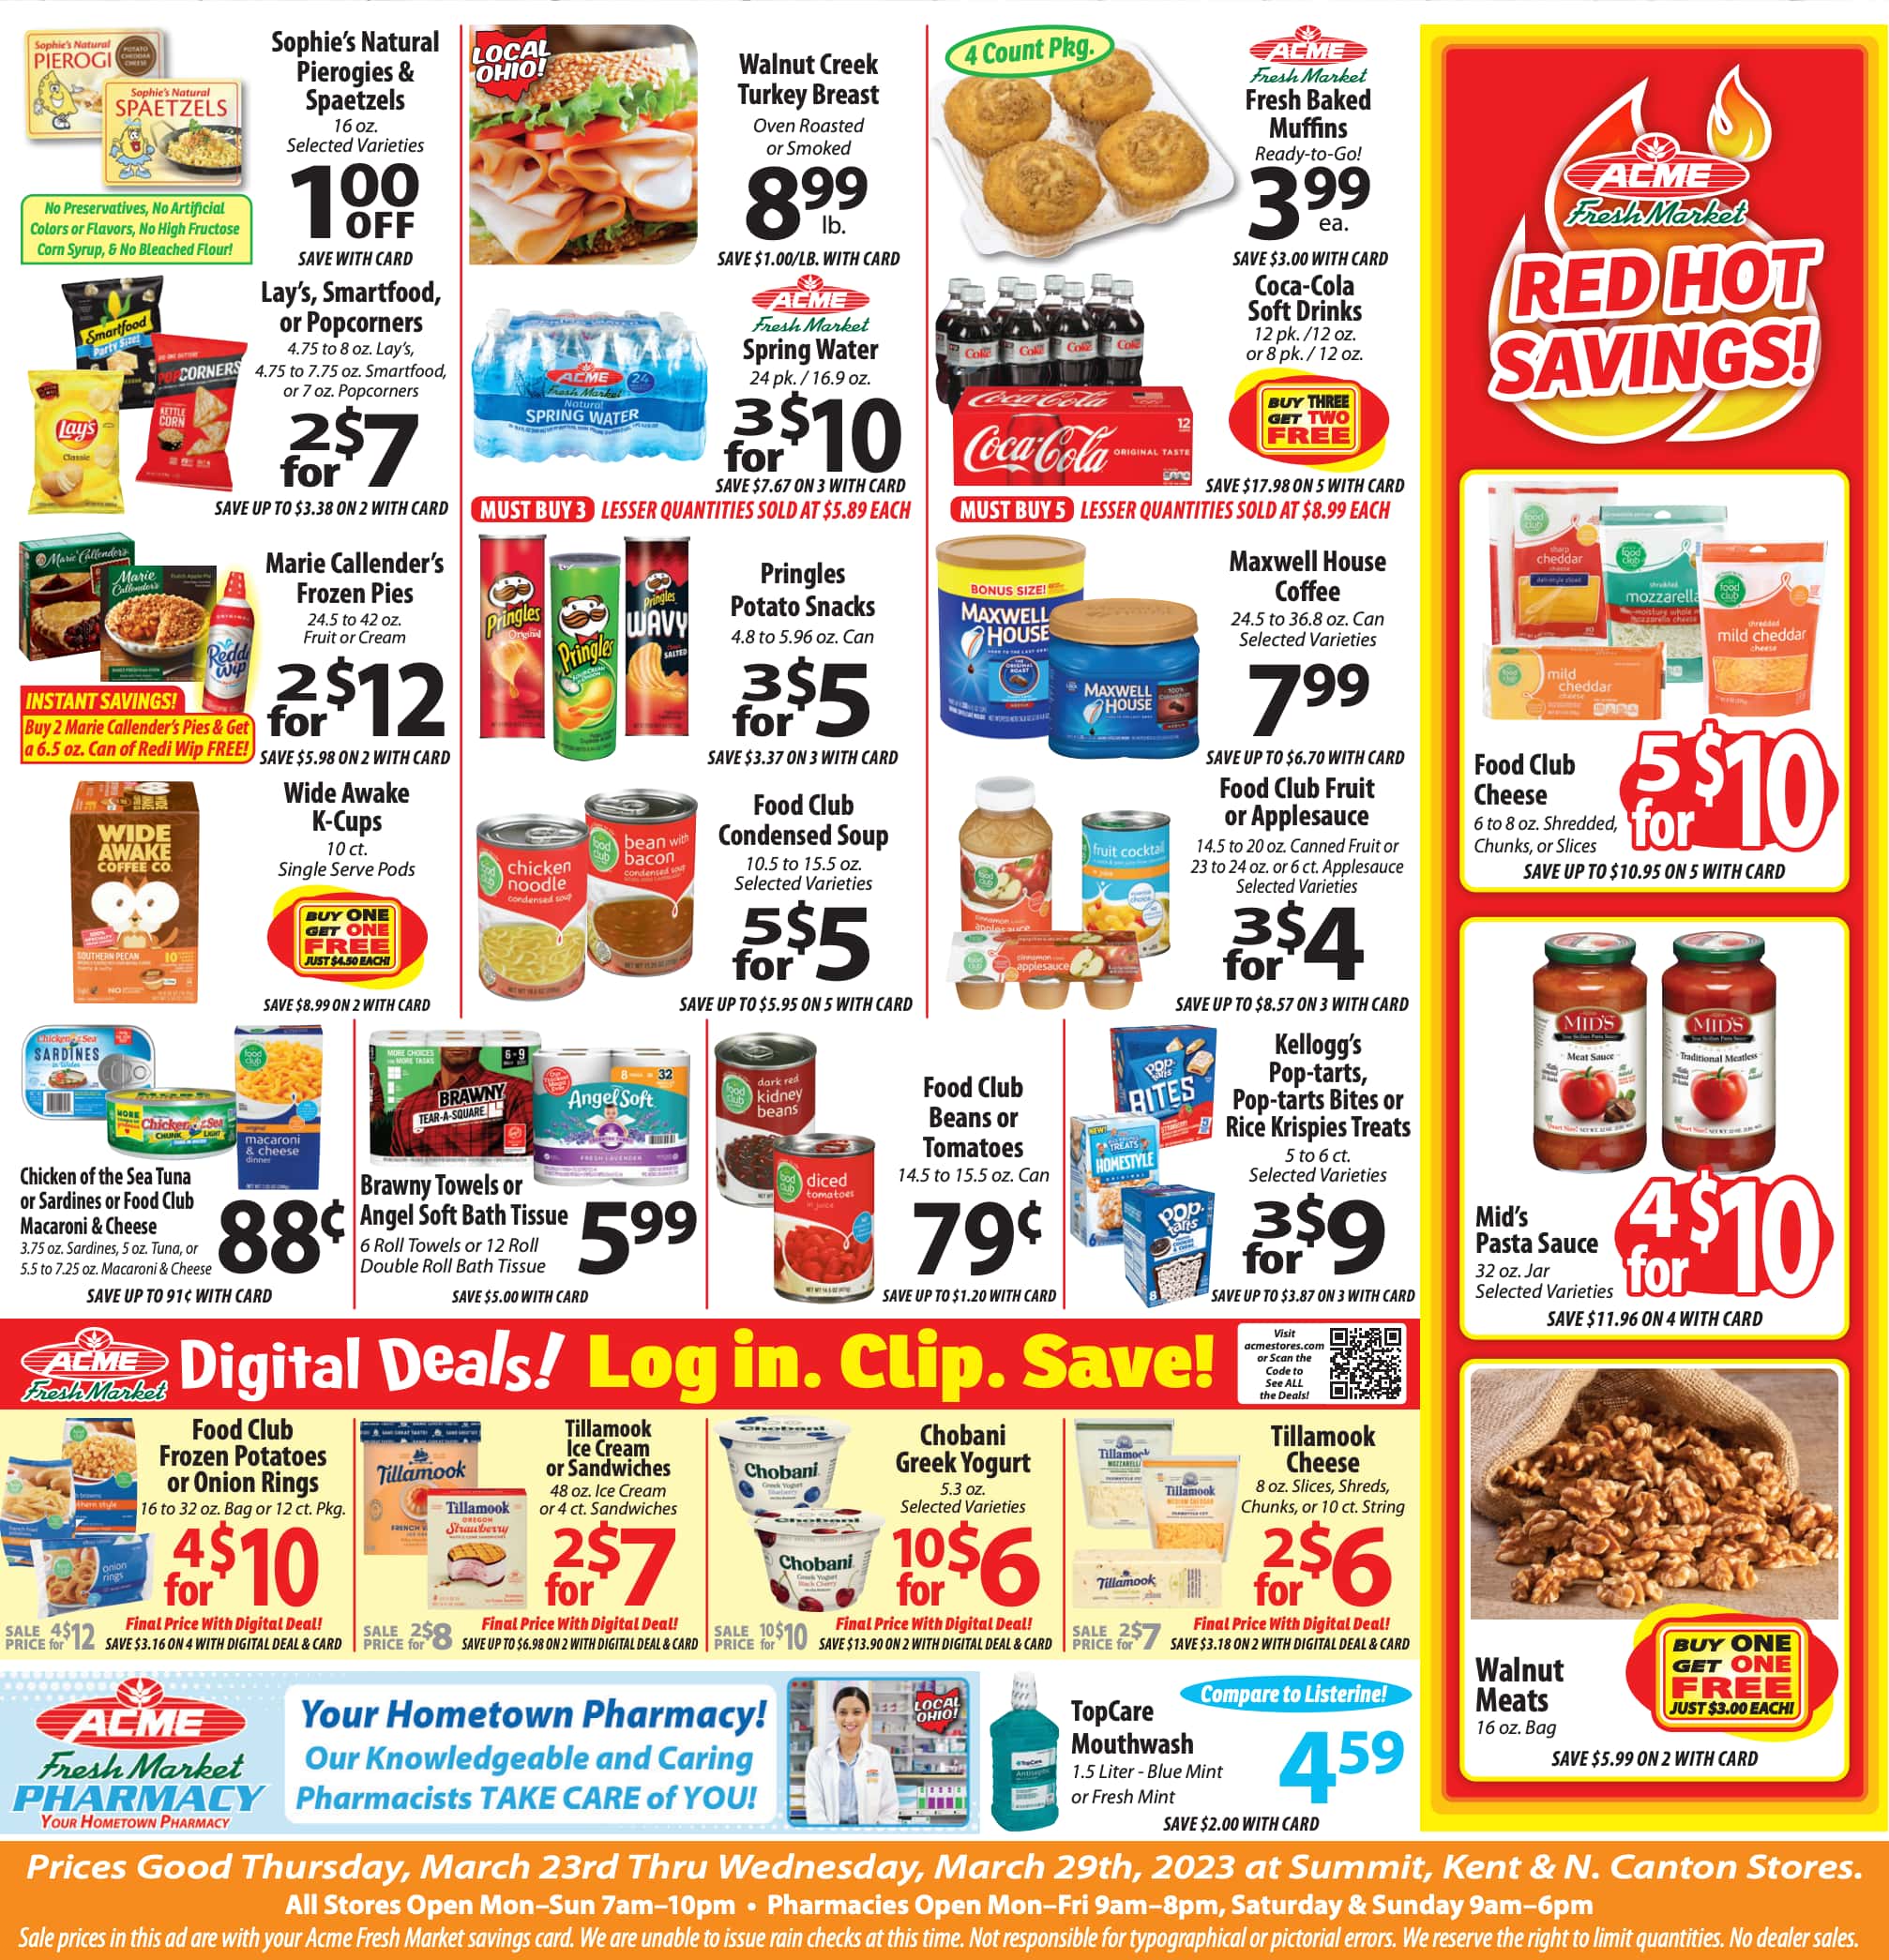 Acme Fresh Market Weekly Ad March 22 - 28, 2023 Preview